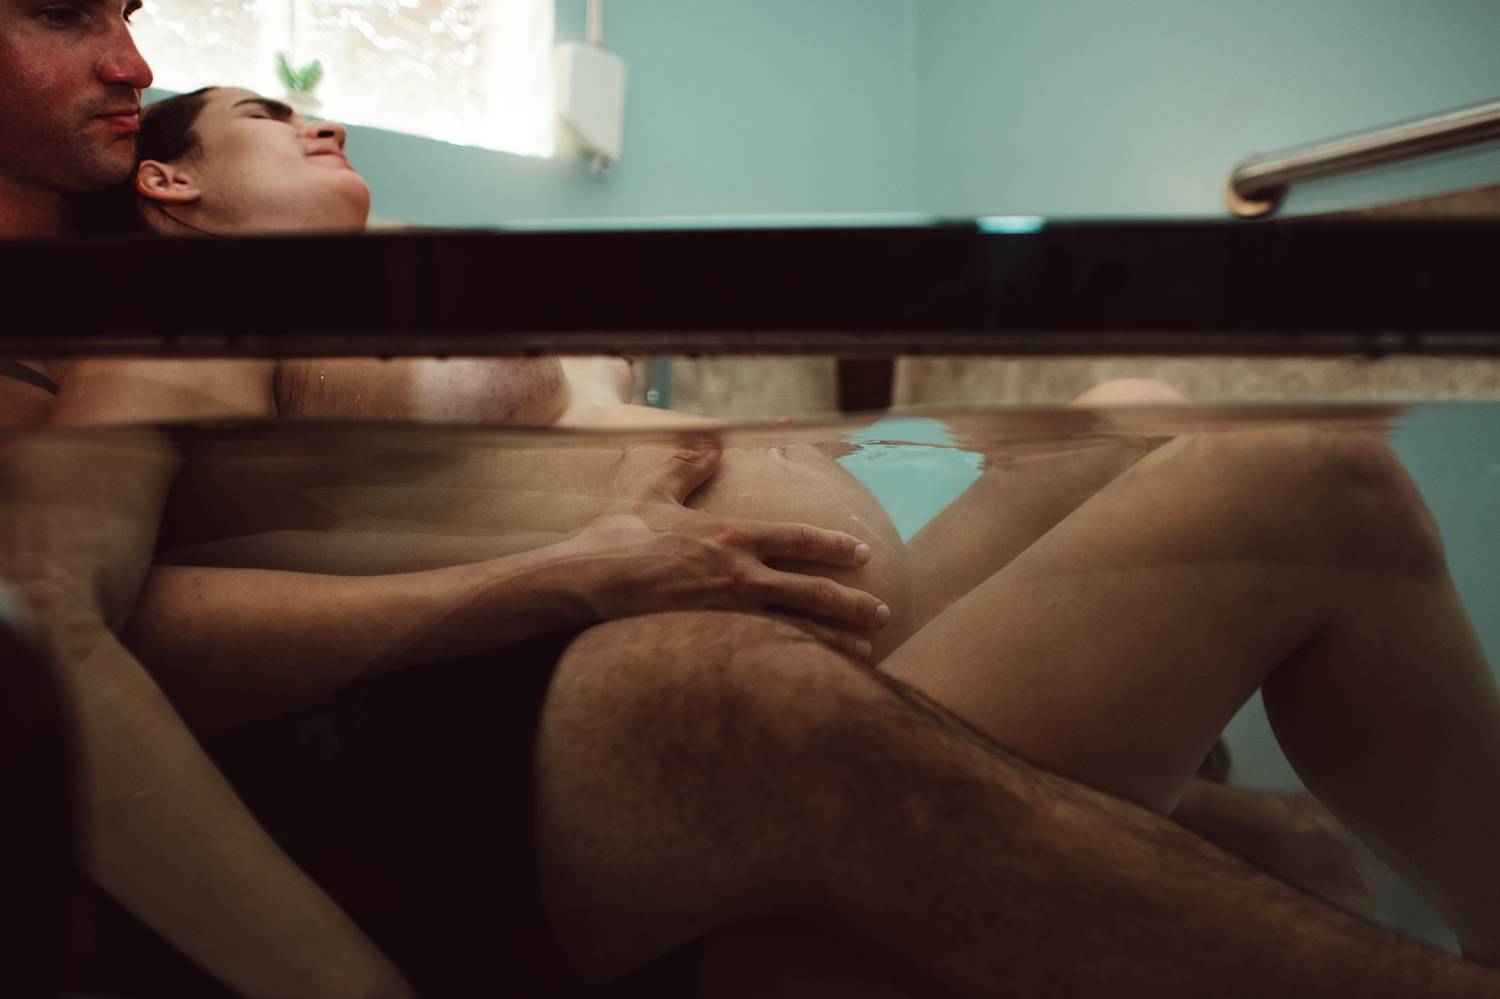 A couple reclines in an inflatable bath at home as the pregnant partner labors